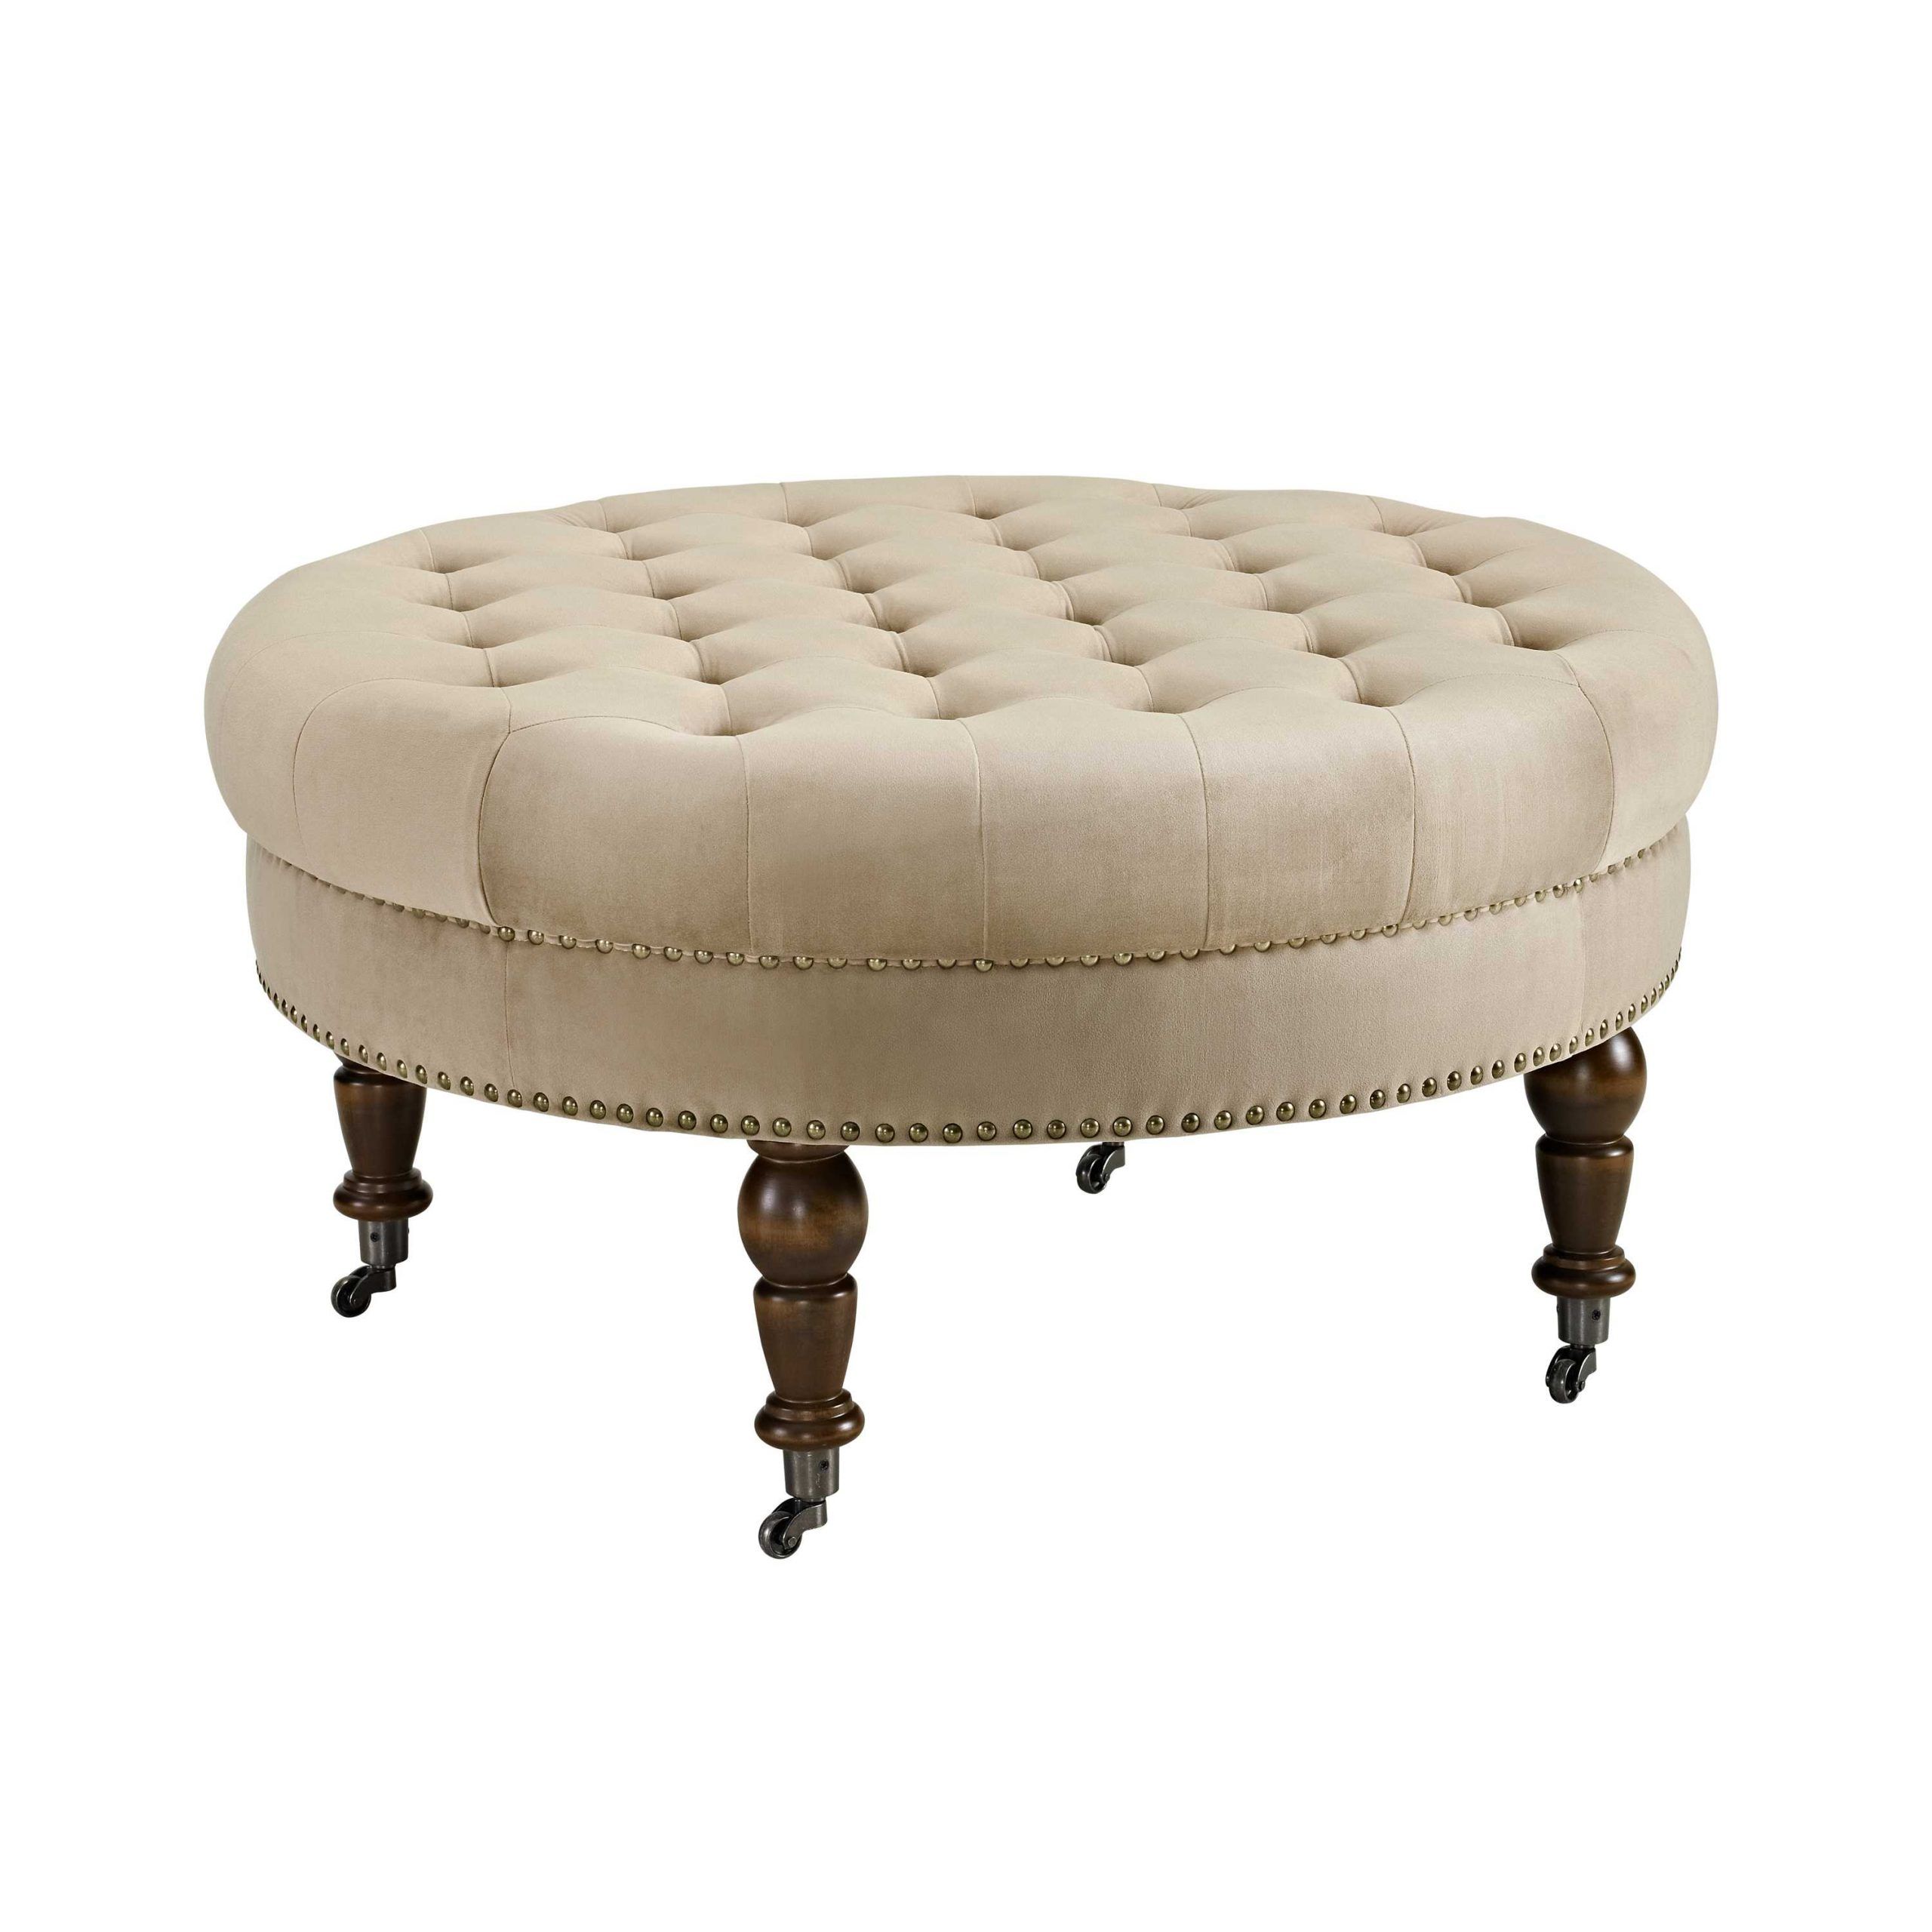 Homeroots Decor Velvet Upholstered Round Tufted Ottoman With Casters Pertaining To Round Pouf Ottomans (View 12 of 20)